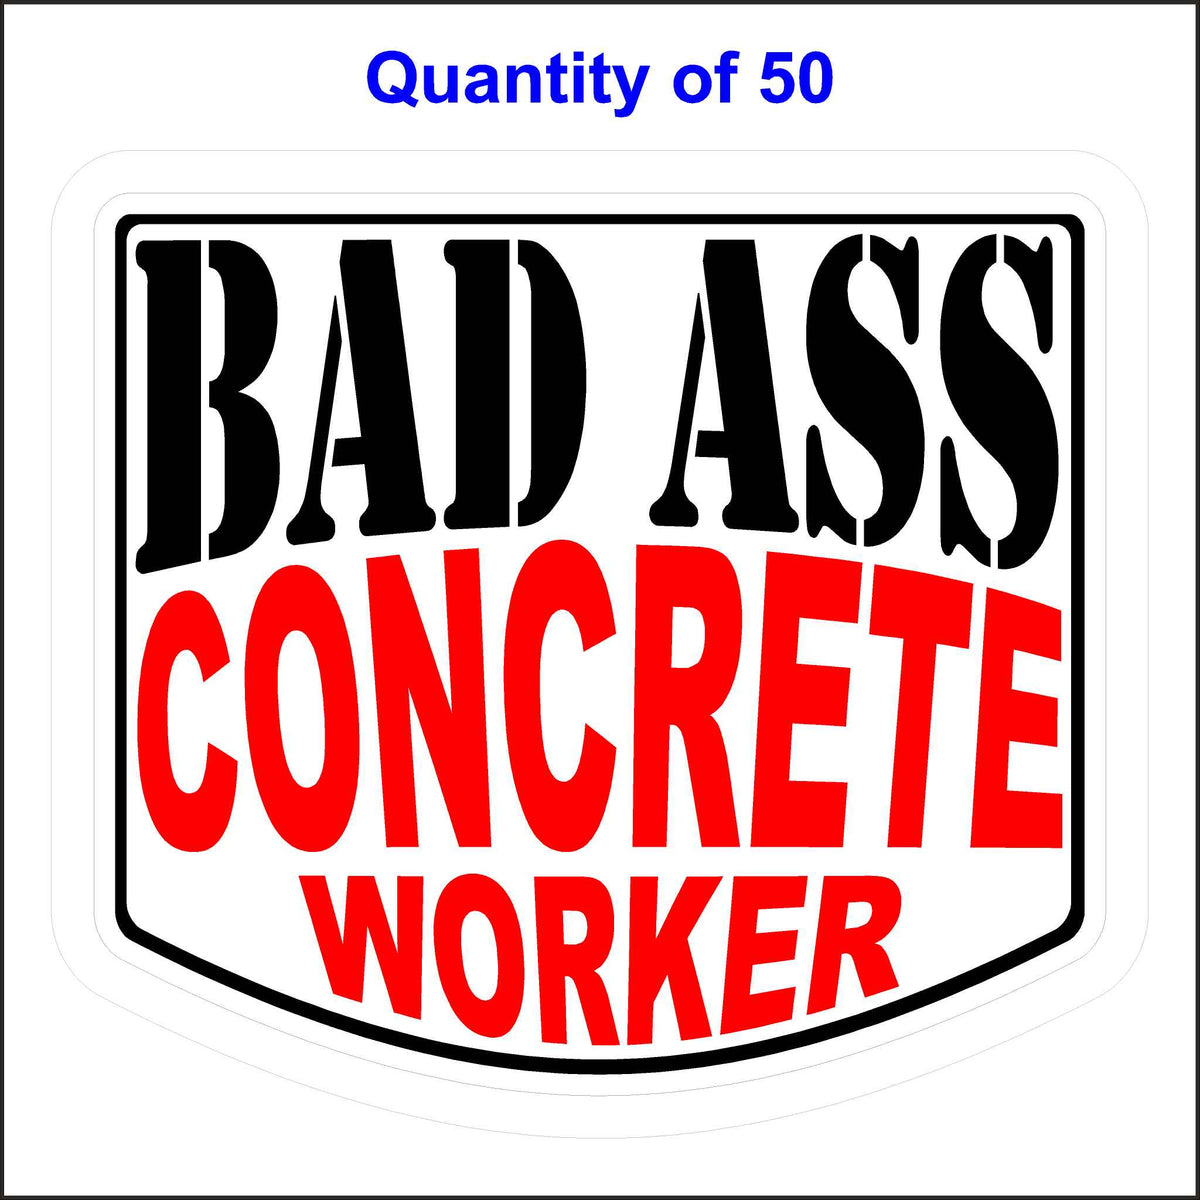 Bad Ass Concrete Worker Stickers 50 Quantity.